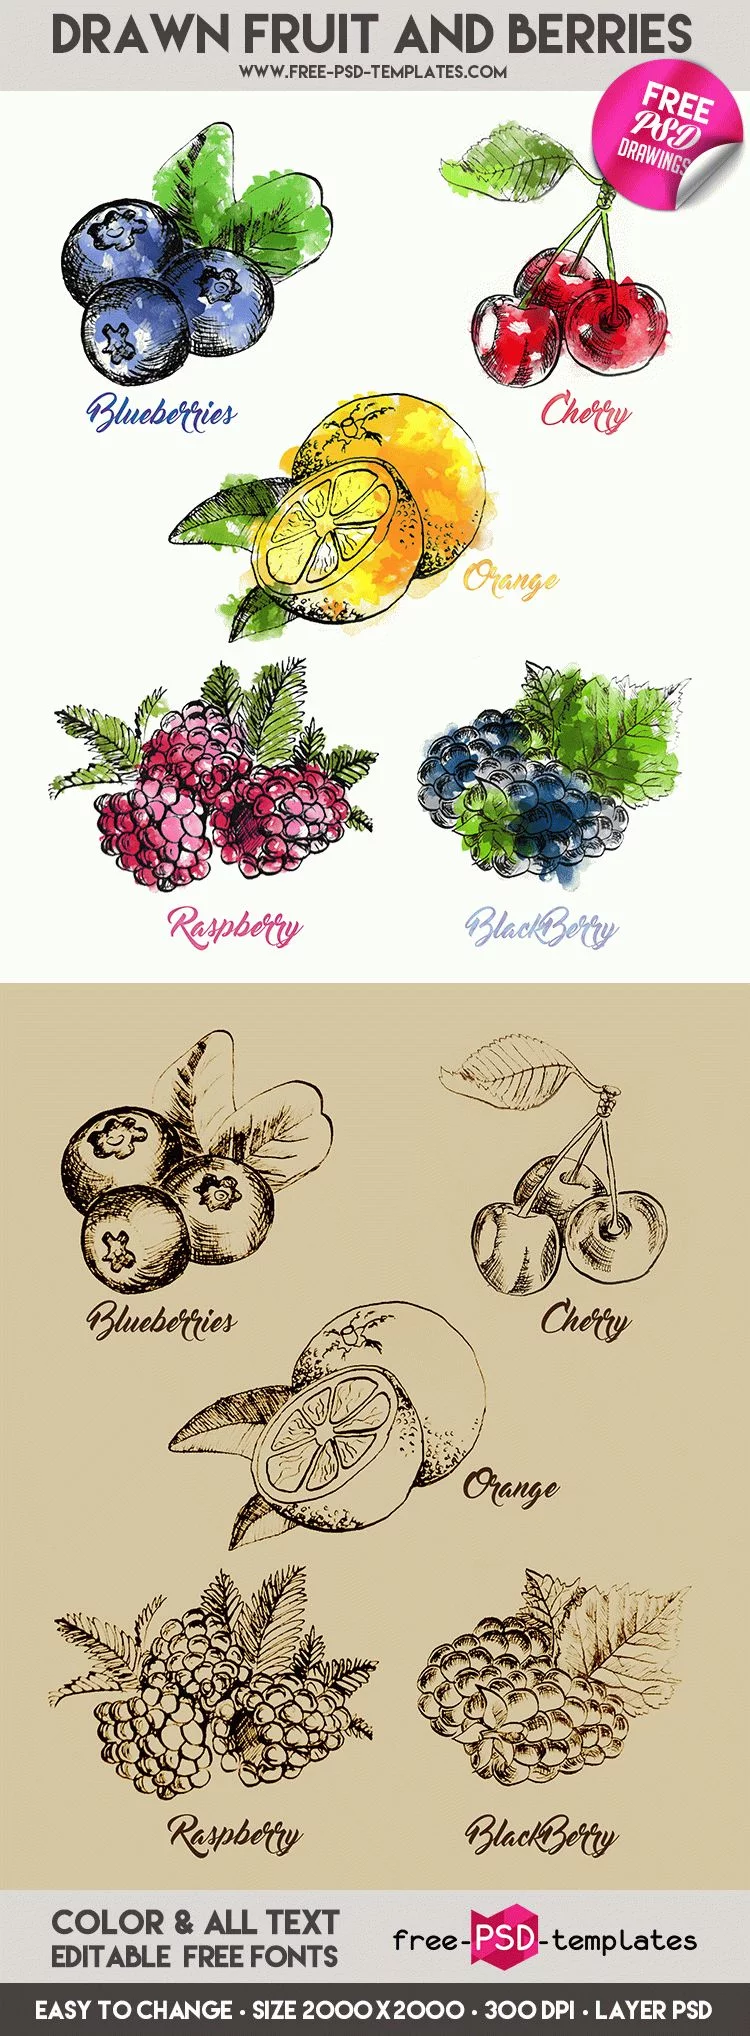 Preview_Drawn_Fruit_and_Berries_result